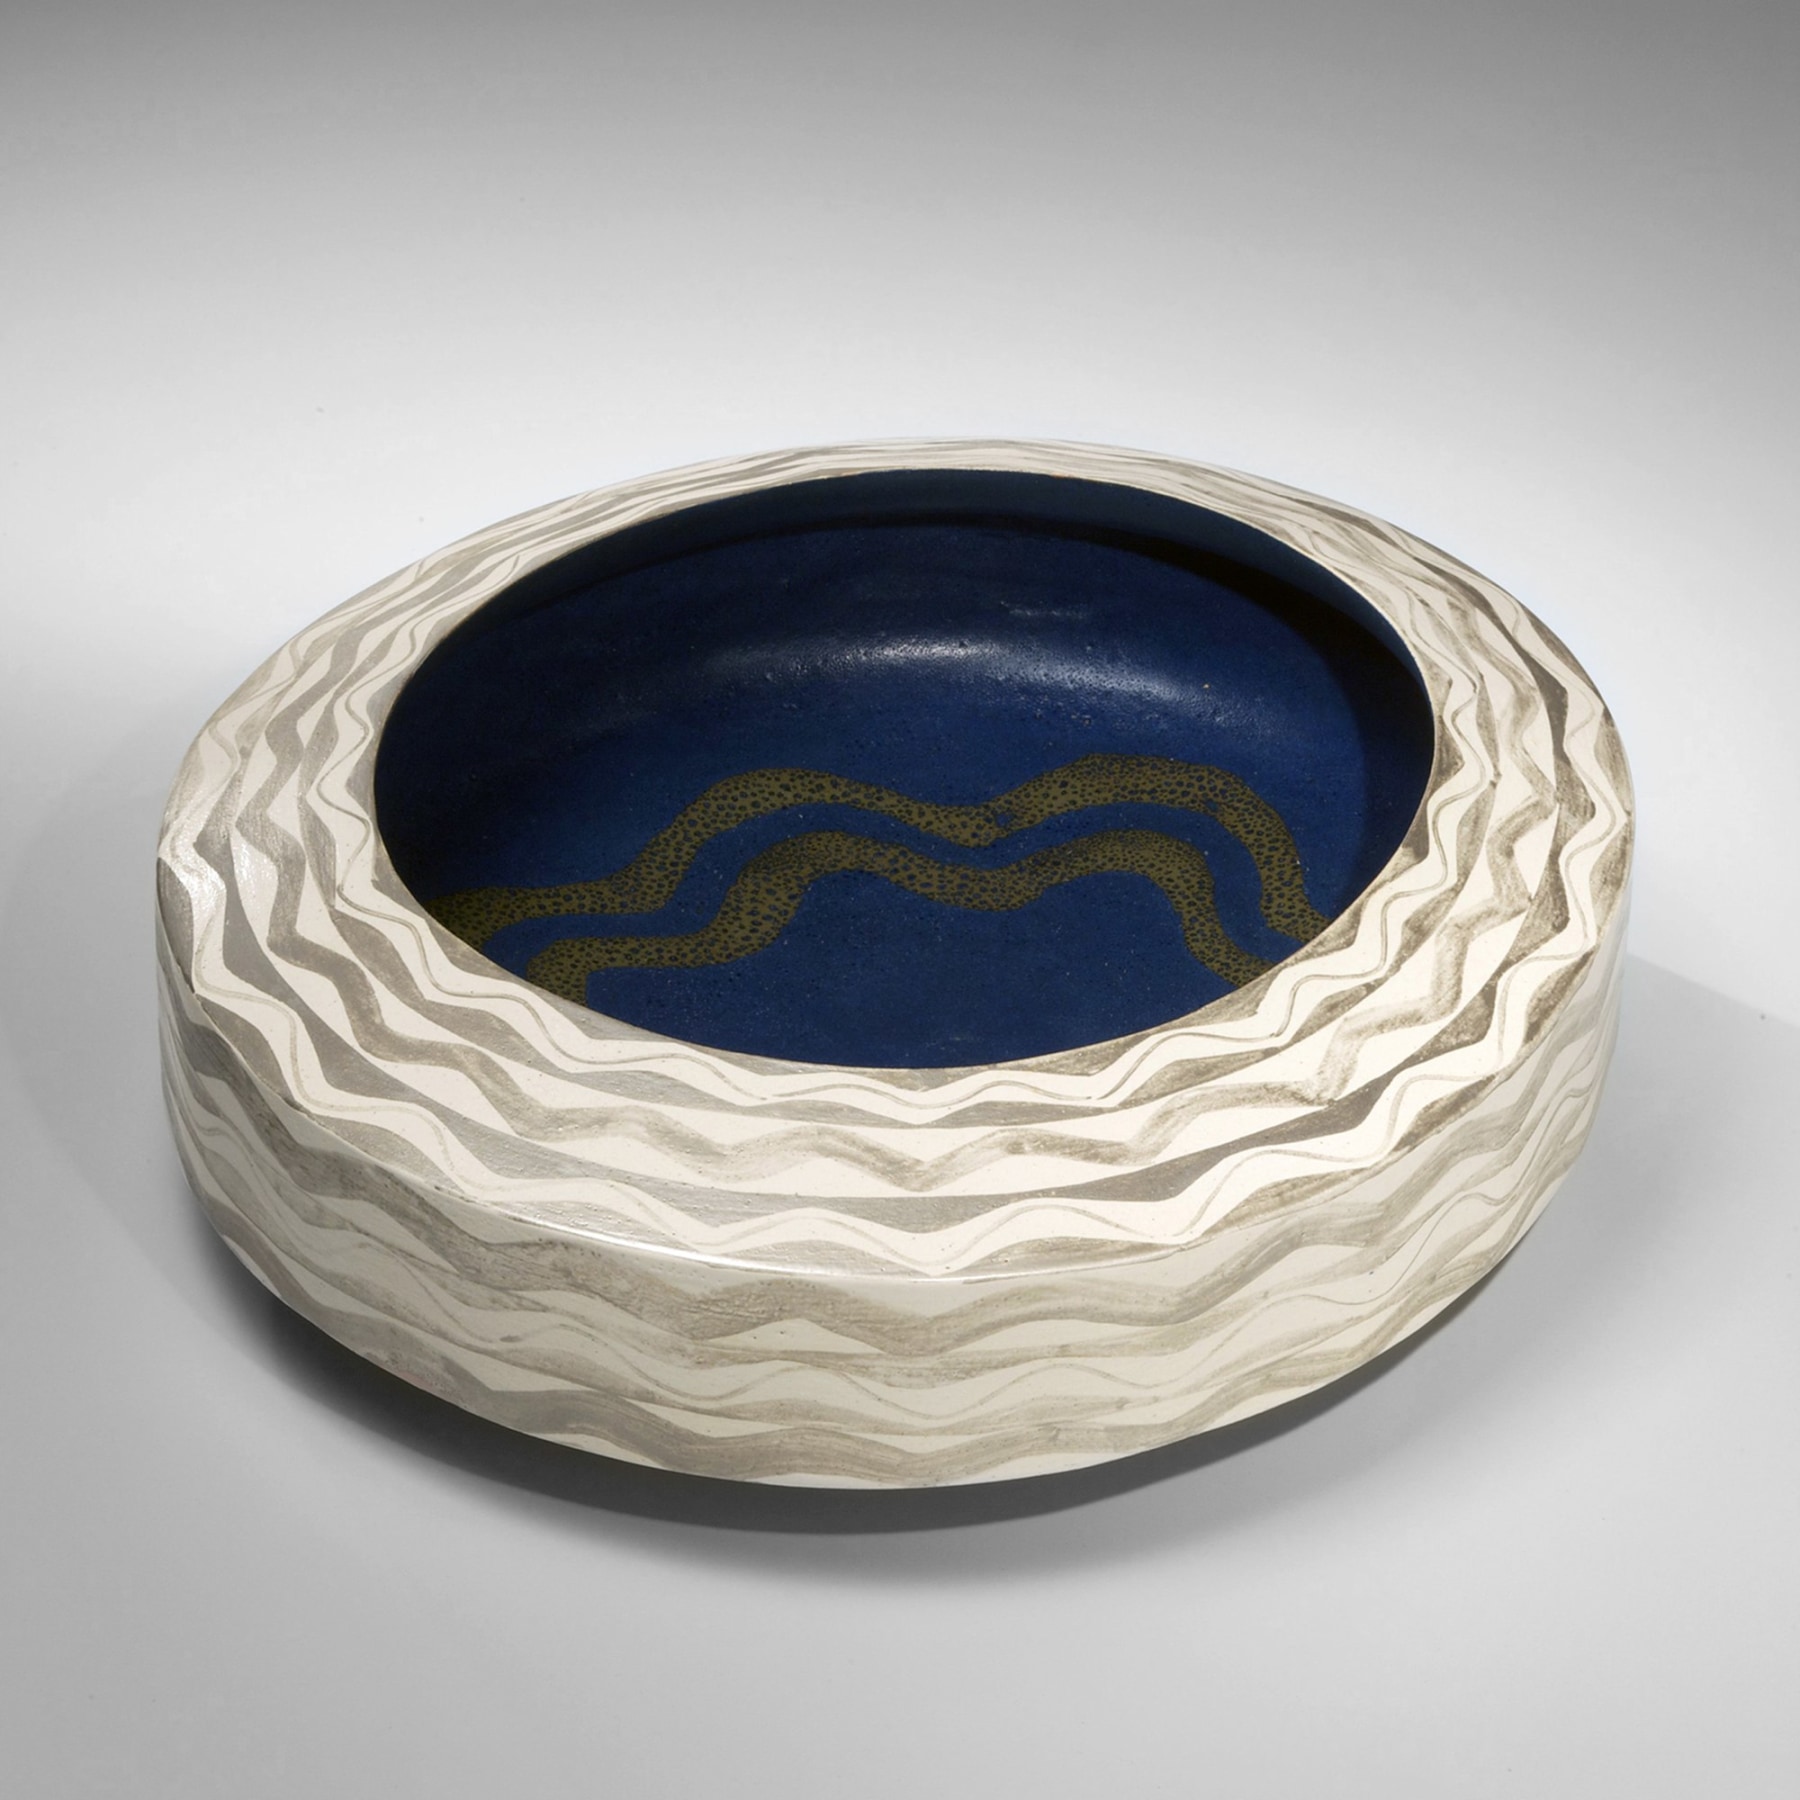 Morino Hiroaki Taimei (b.1934), Low, ovoid bowl with wave-patterned silver glaze and white, blue and gold glazed interior